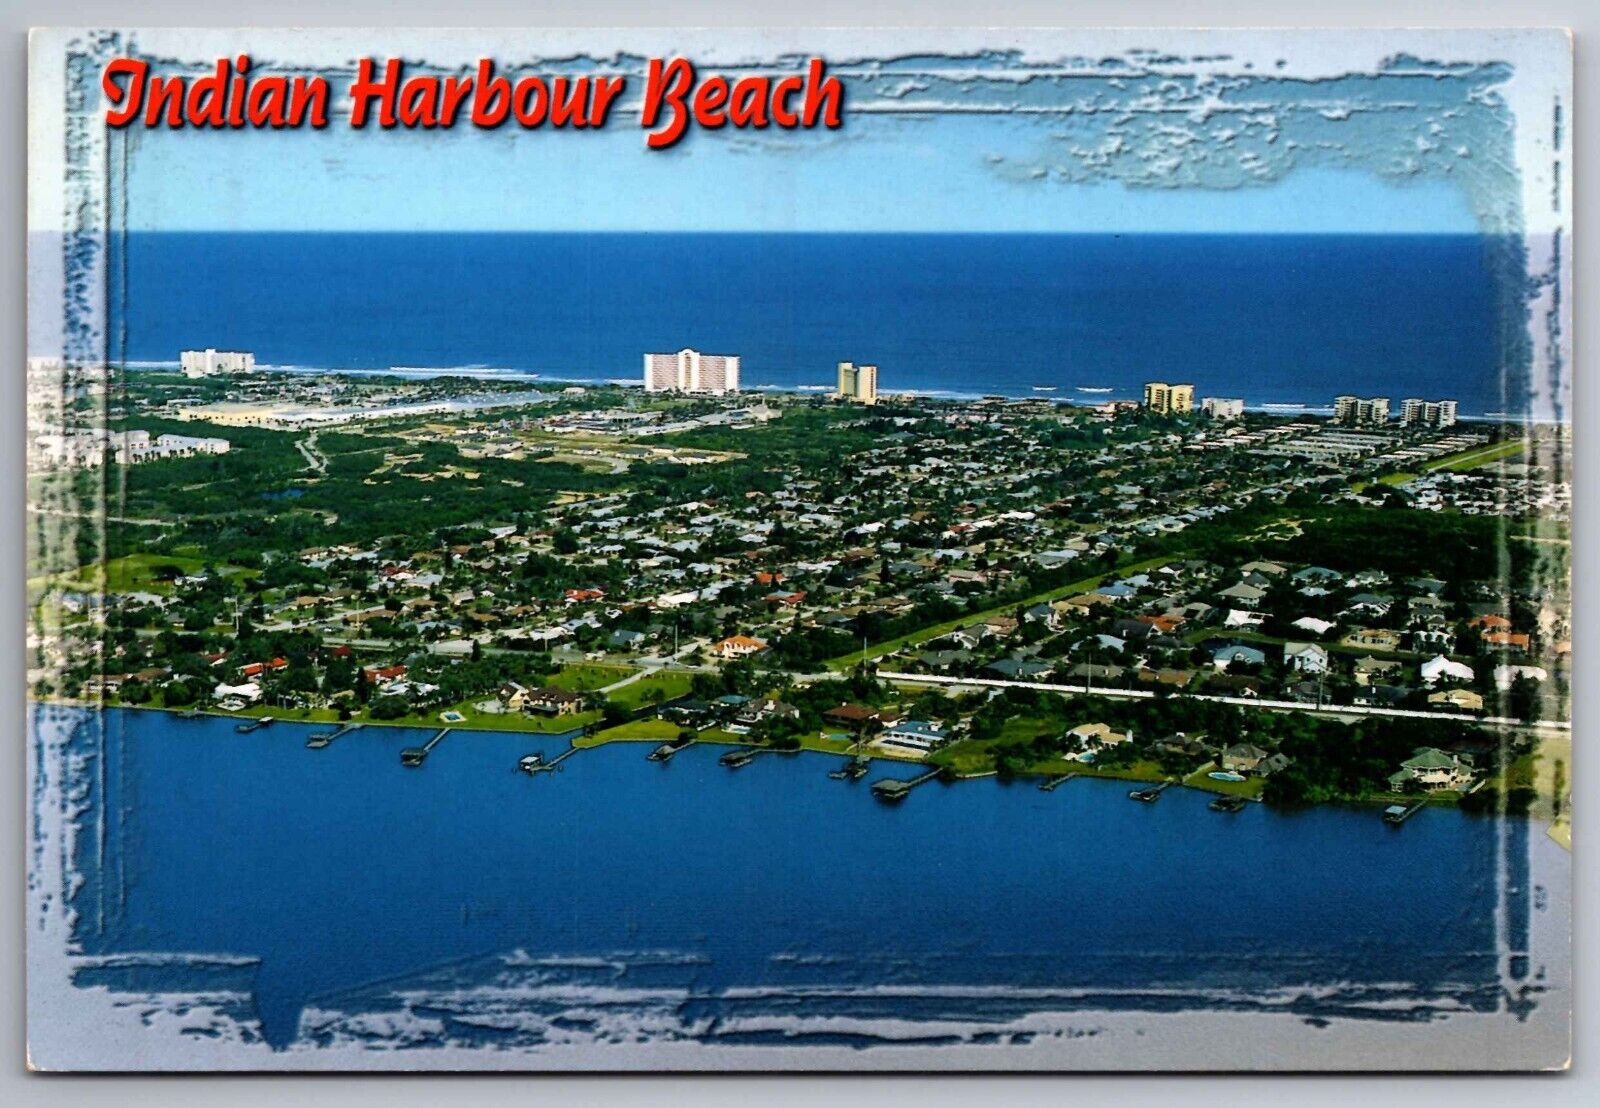 Postcard Greetings from Indian Harbour Beach Florida     A 19